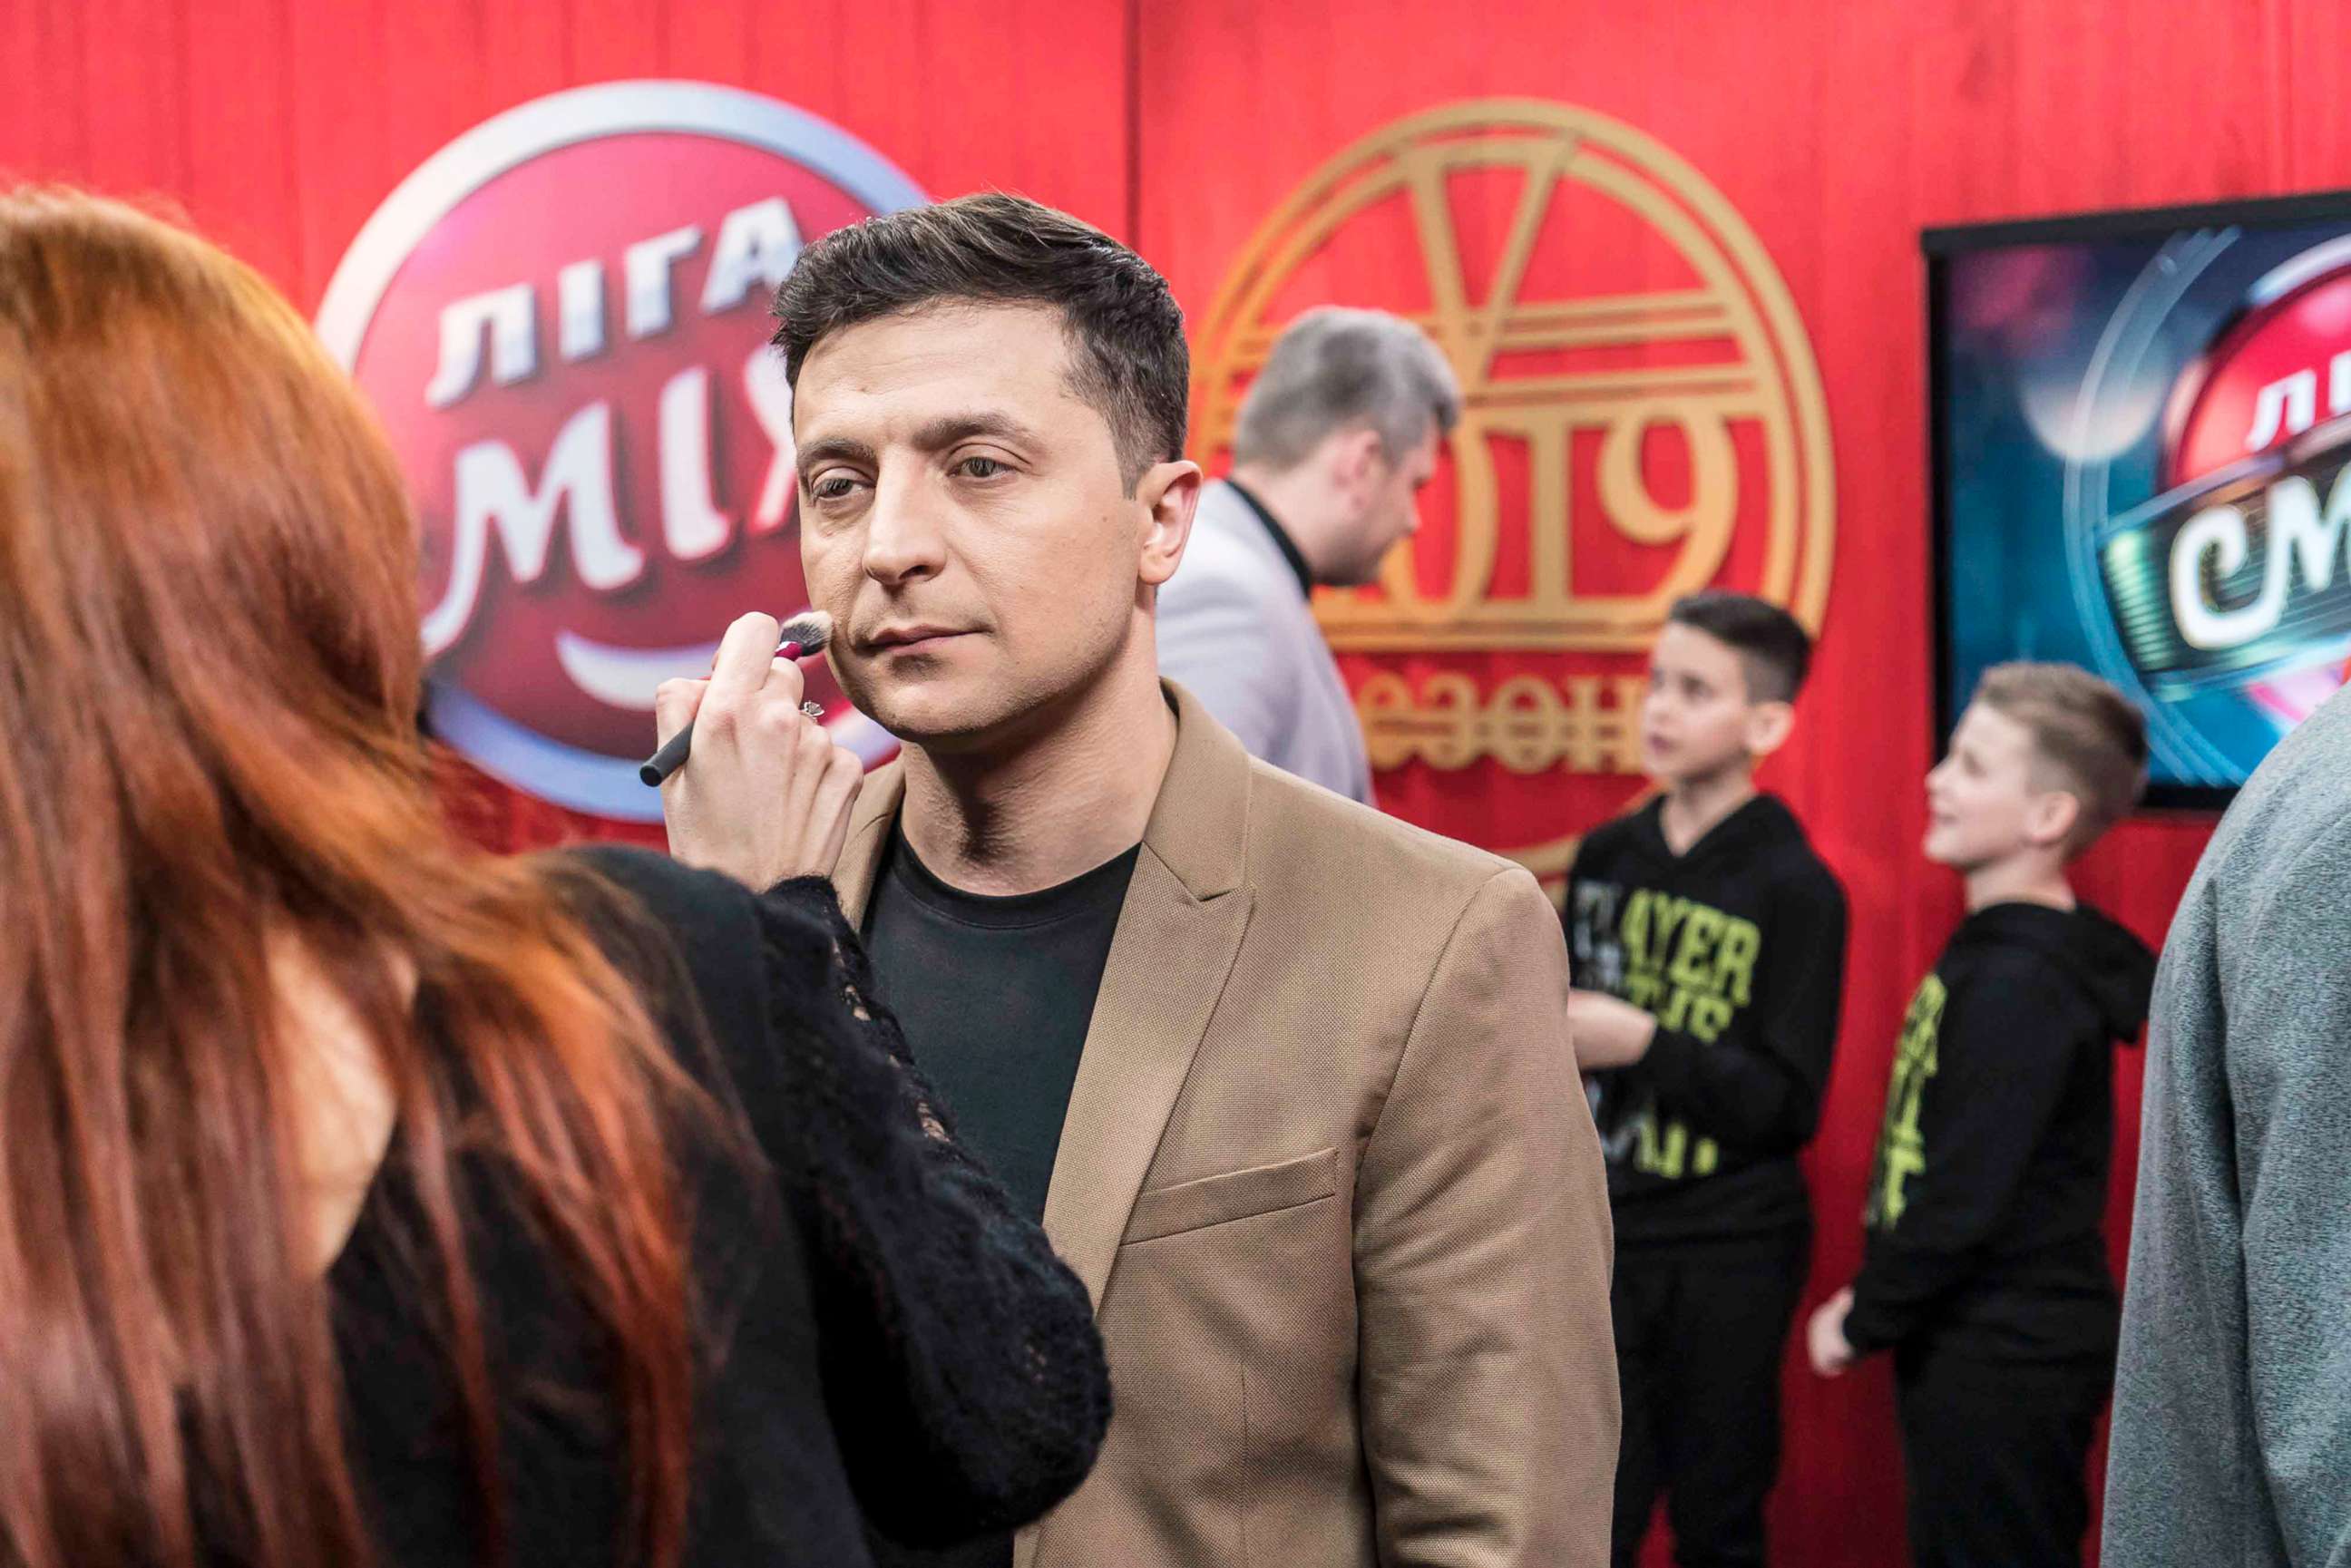 PHOTO: Ukrainian presidential candidate Volodymyr Zelenskiy has makeup applied backstage during the filming of his comedy show Liga Smeha (League of Laughter) on March 19, 2019 in Kiev, Ukraine.